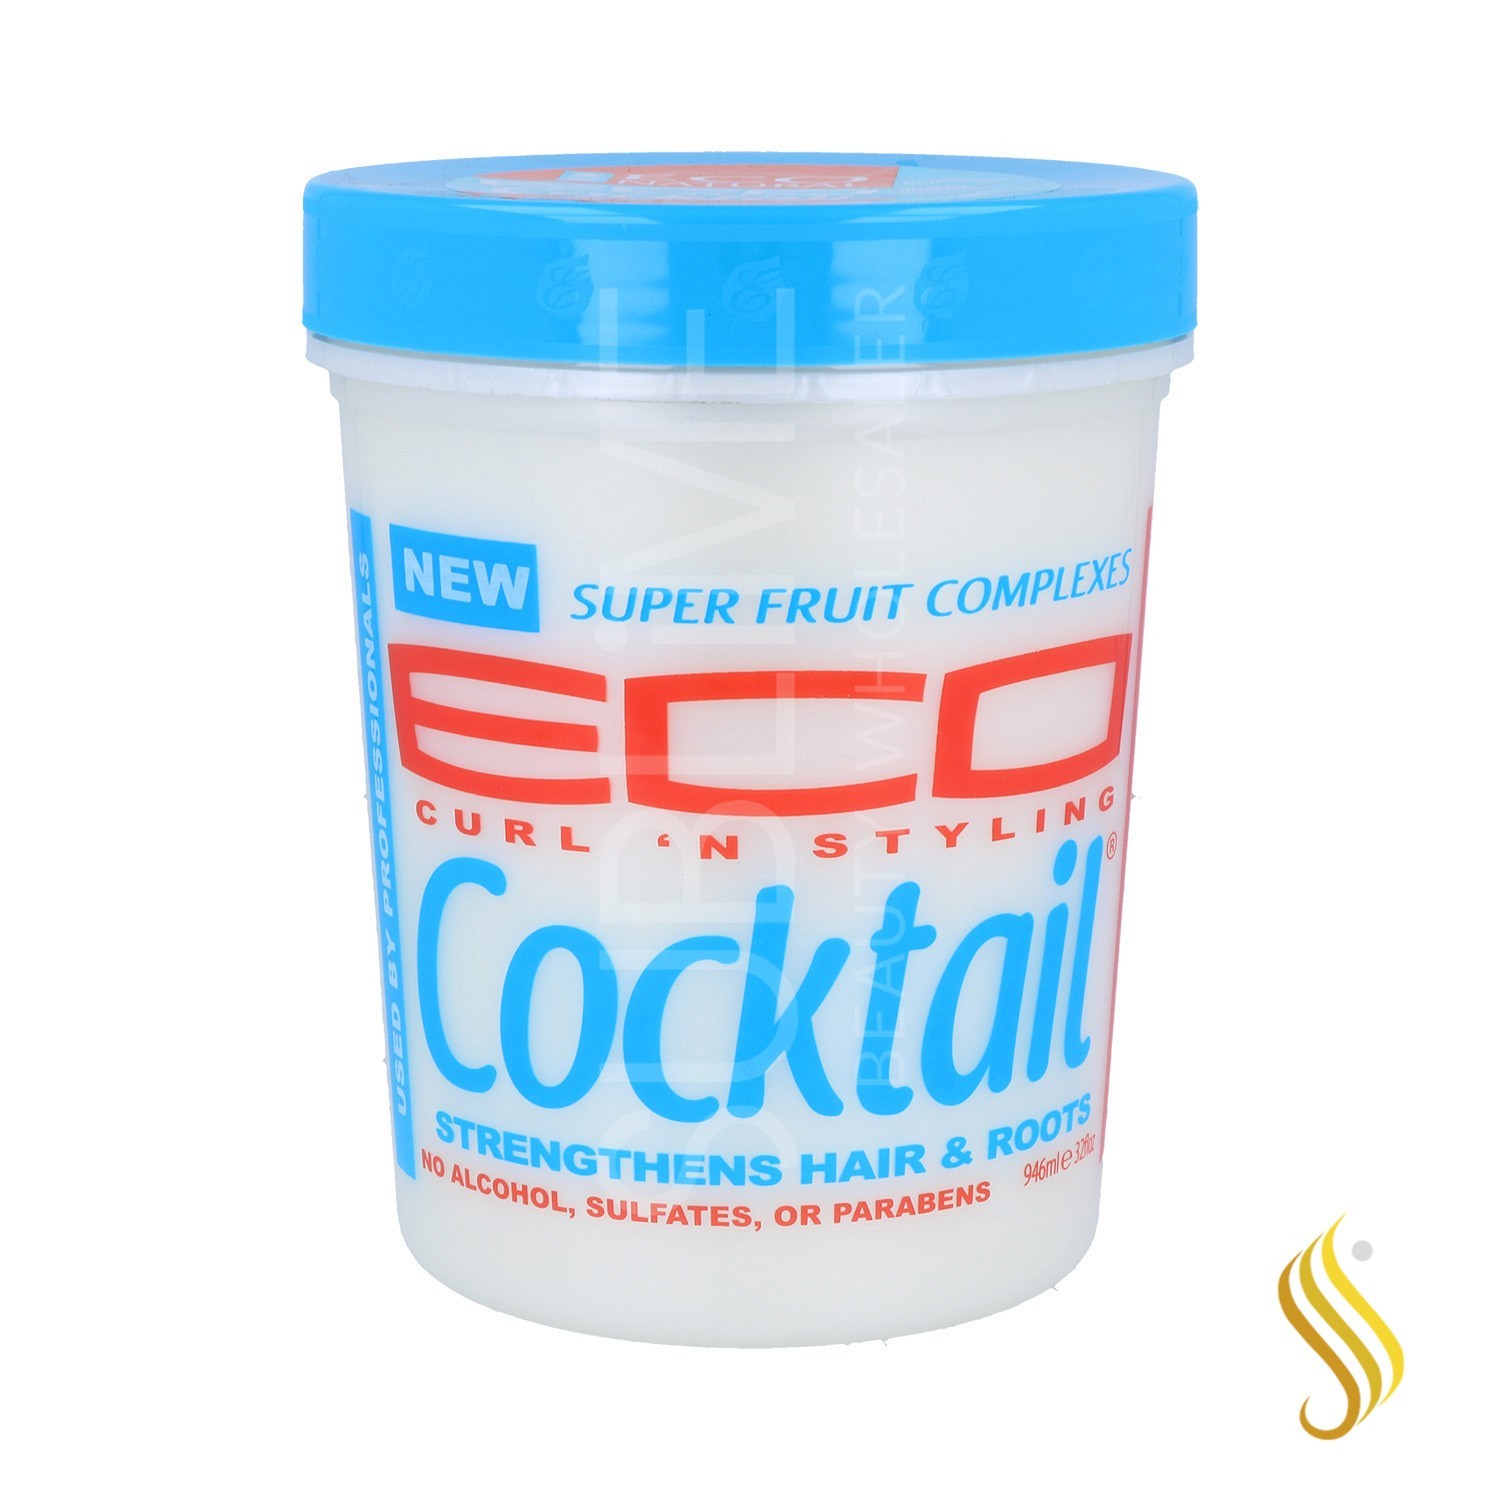 Eco Styler Curl 'N Styling Cocktail 32Oz/946 ml